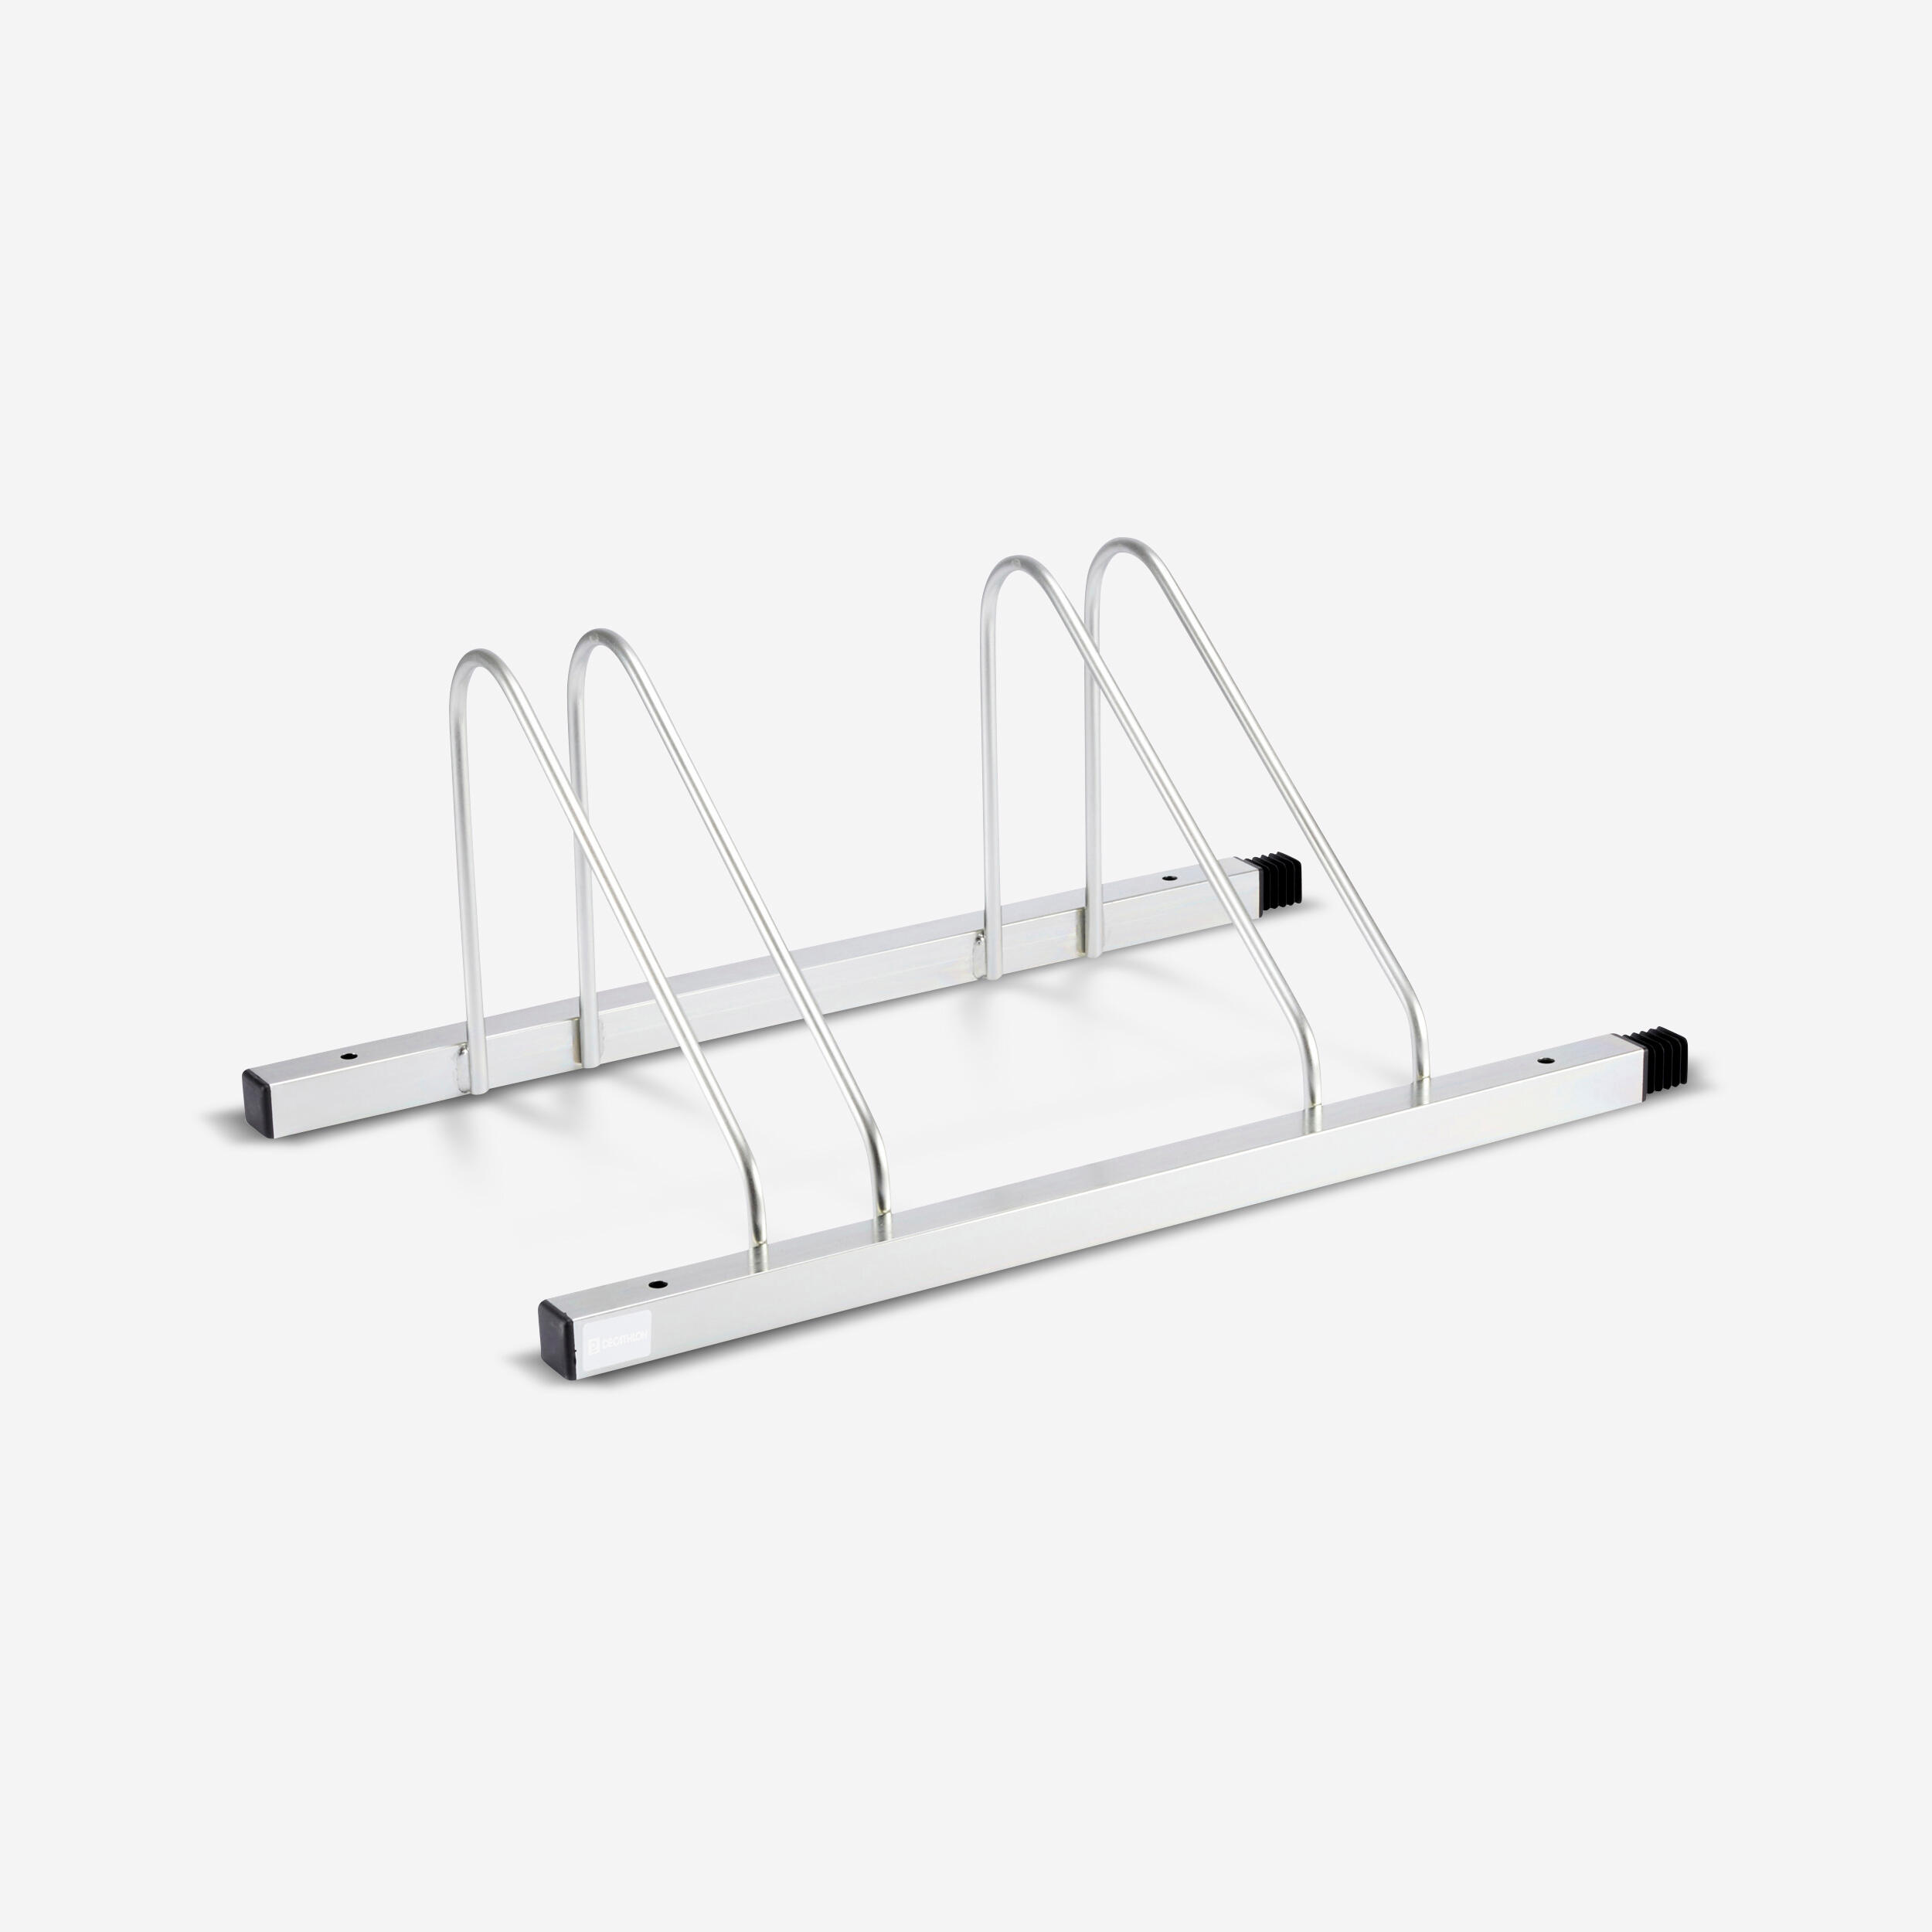 Image of Bike Stand for 2 Bikes